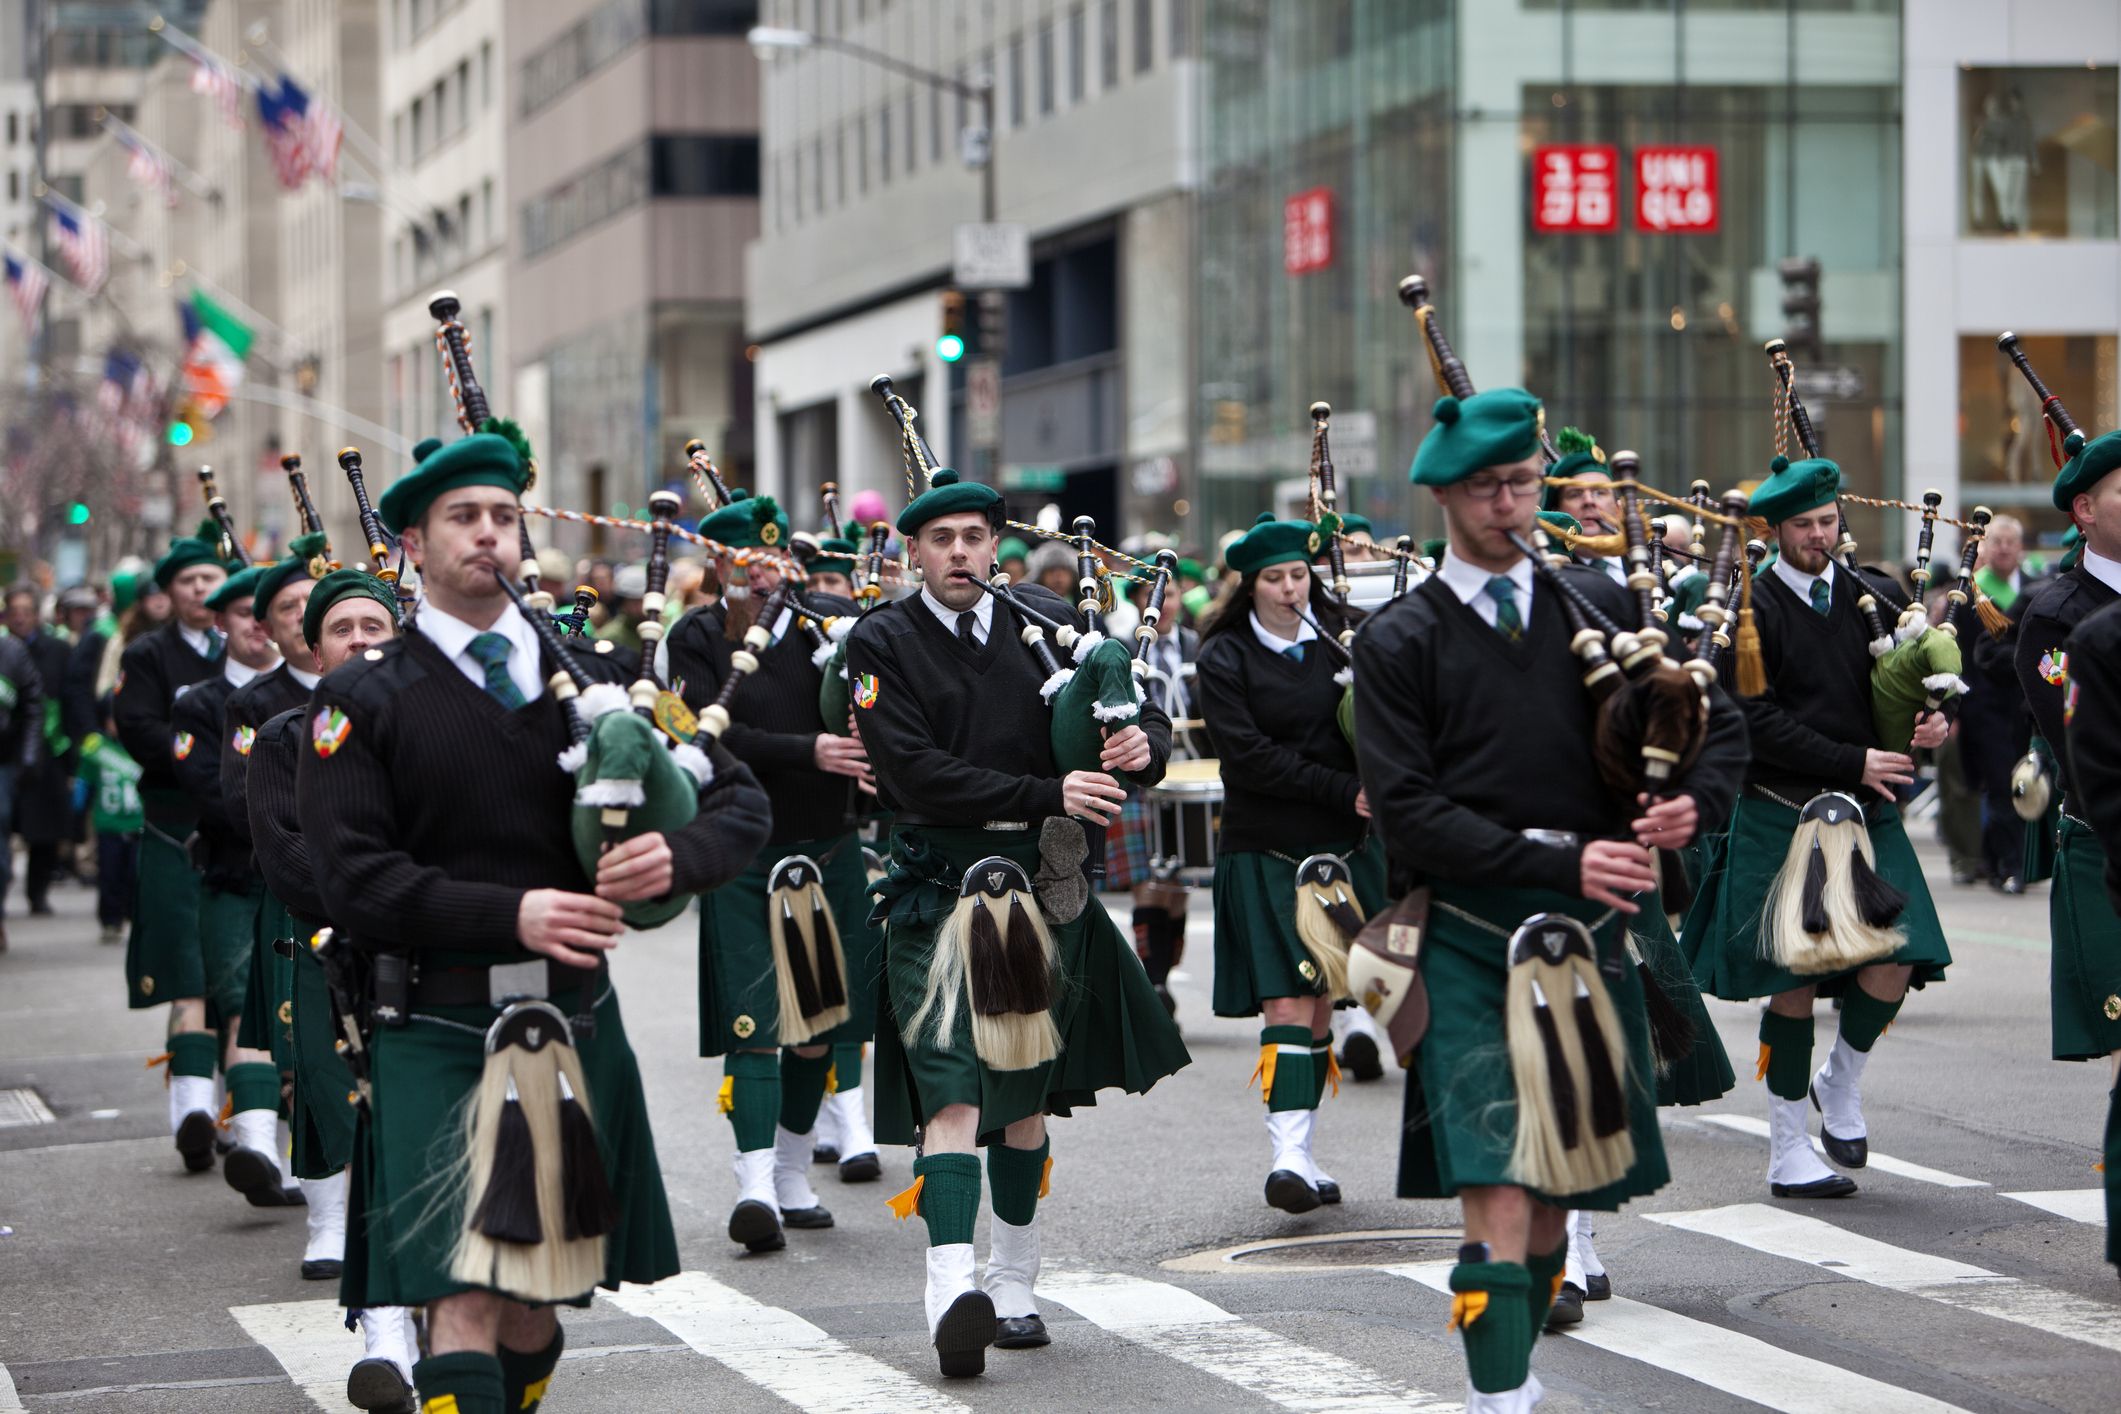 One of the St. Patrick's Day parads with men in traditional Irish clothing playing the uilleann pipes.